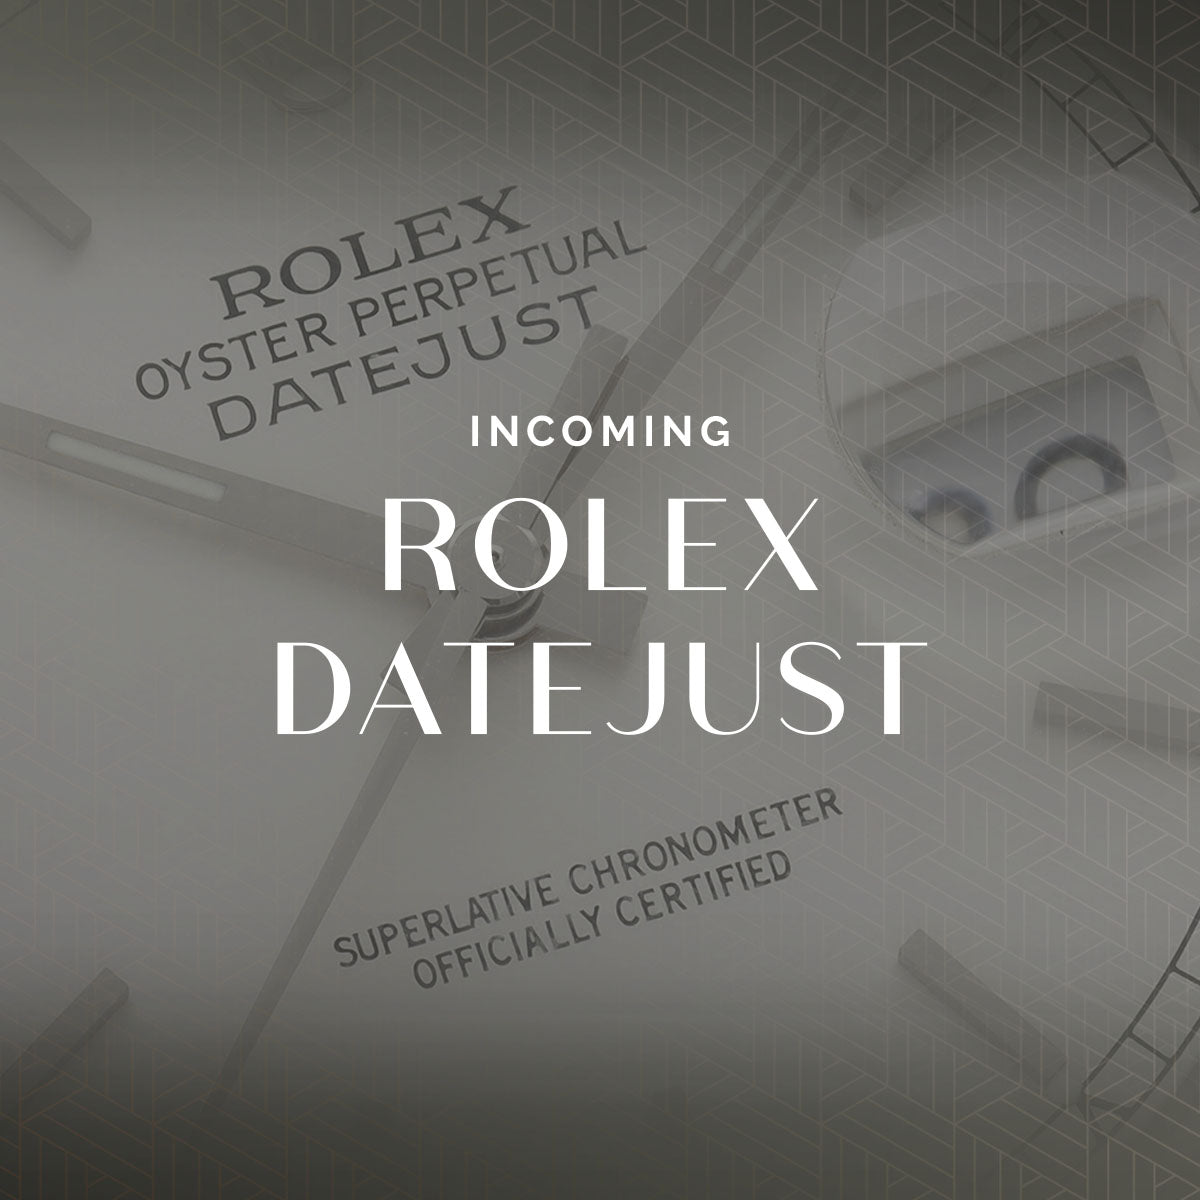 Rolex Datejust 1601 rare Ghost dial - incoming